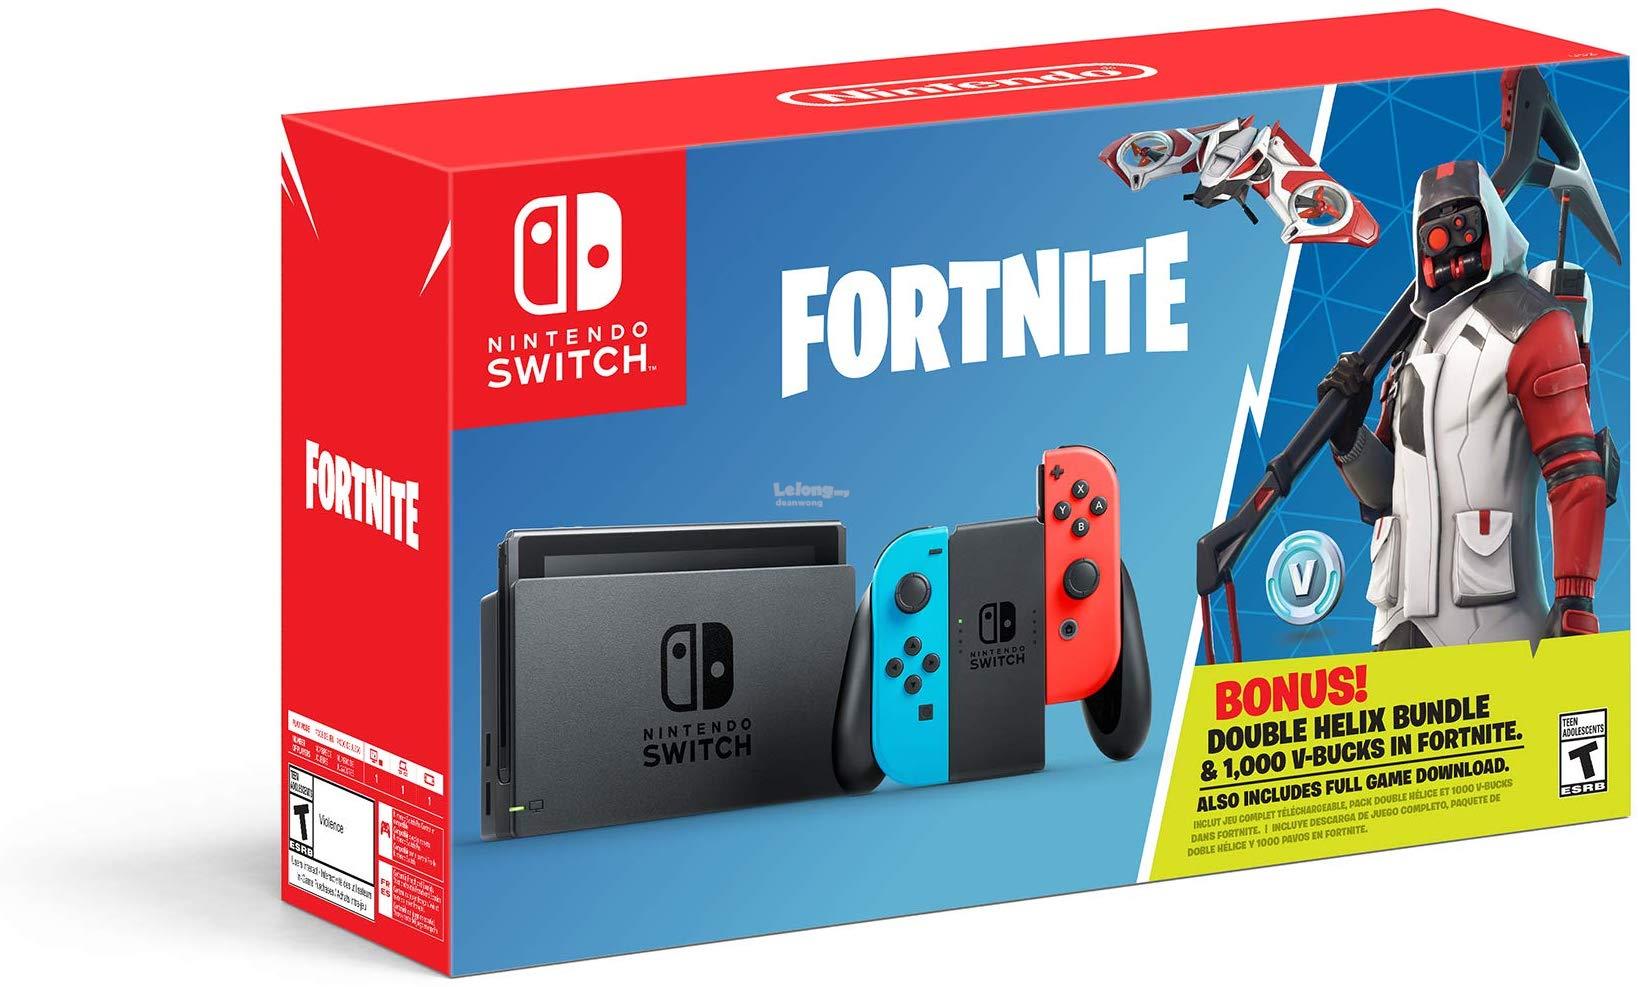 Nintendo Switch Fortnite Double End 10 31 2019 2 15 Pm